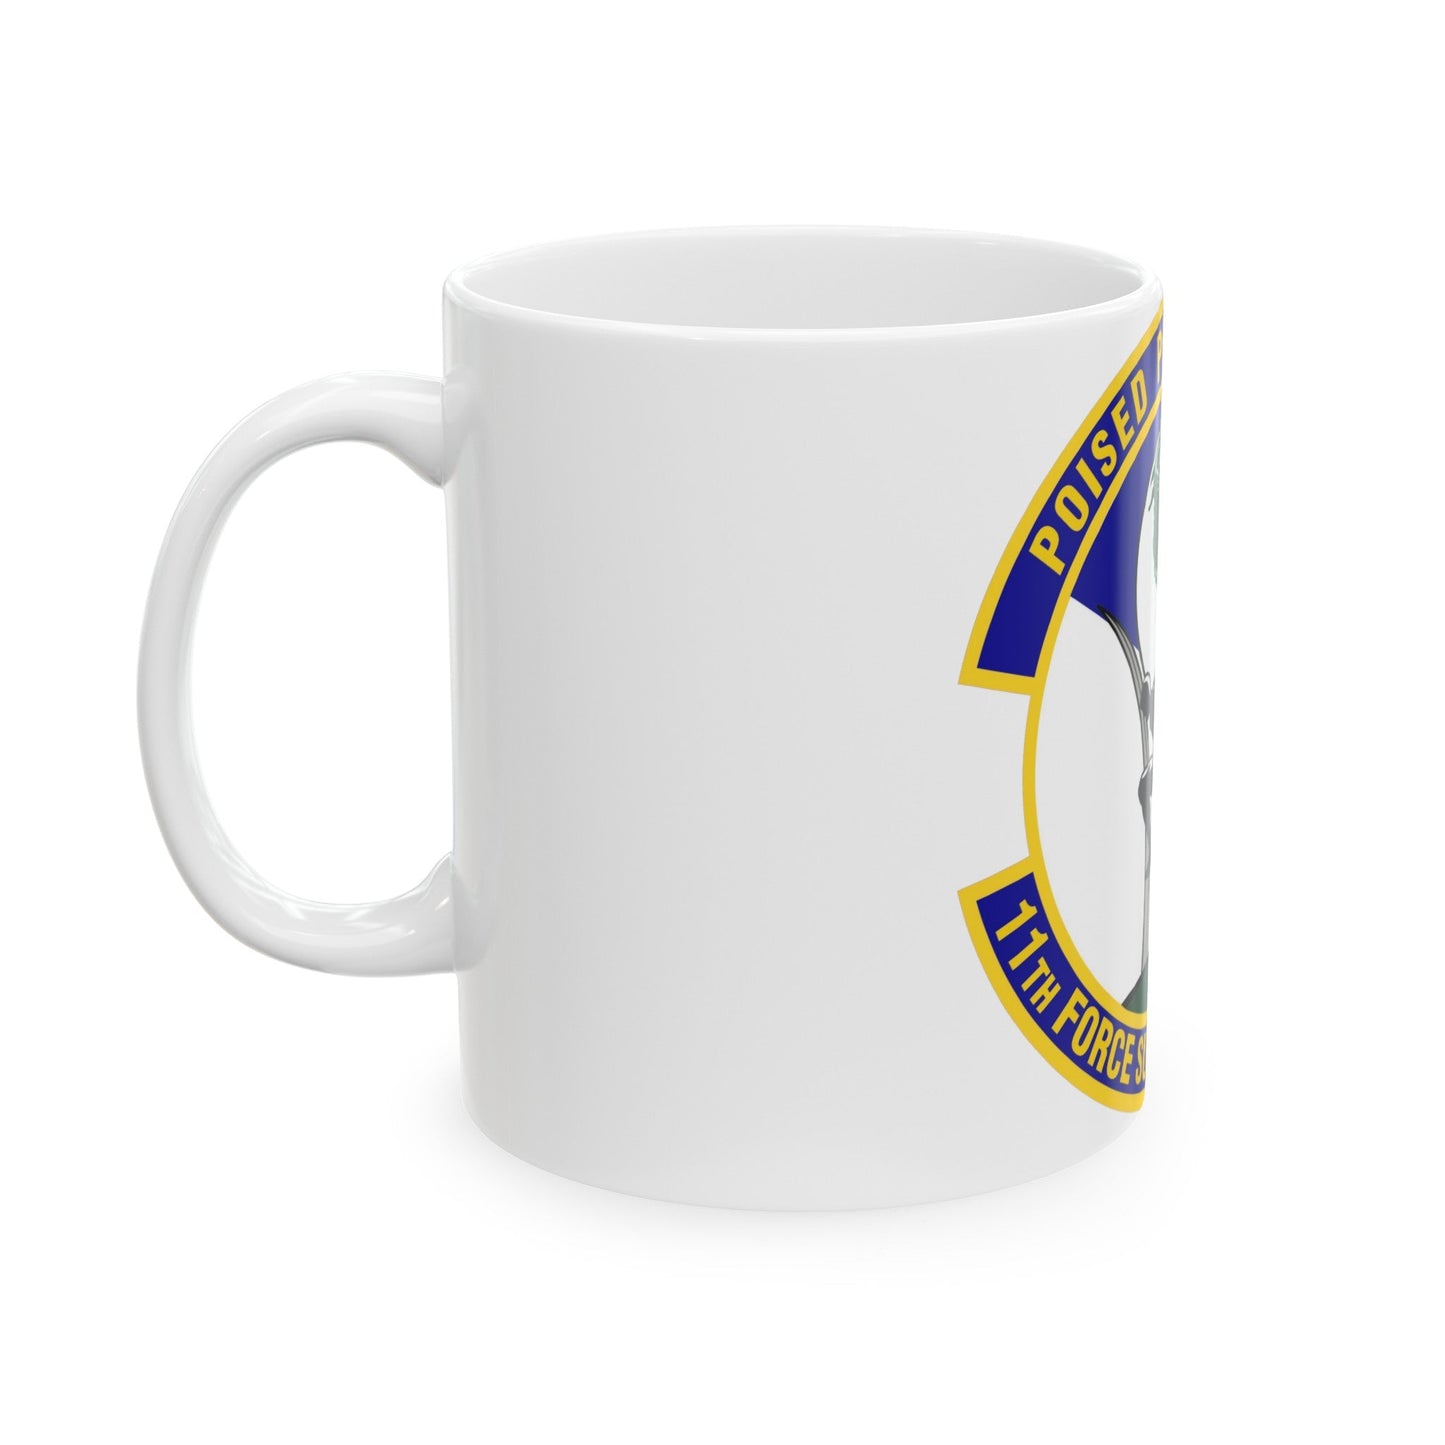 11 Force Support Squadron USAF (U.S. Air Force) White Coffee Mug-The Sticker Space